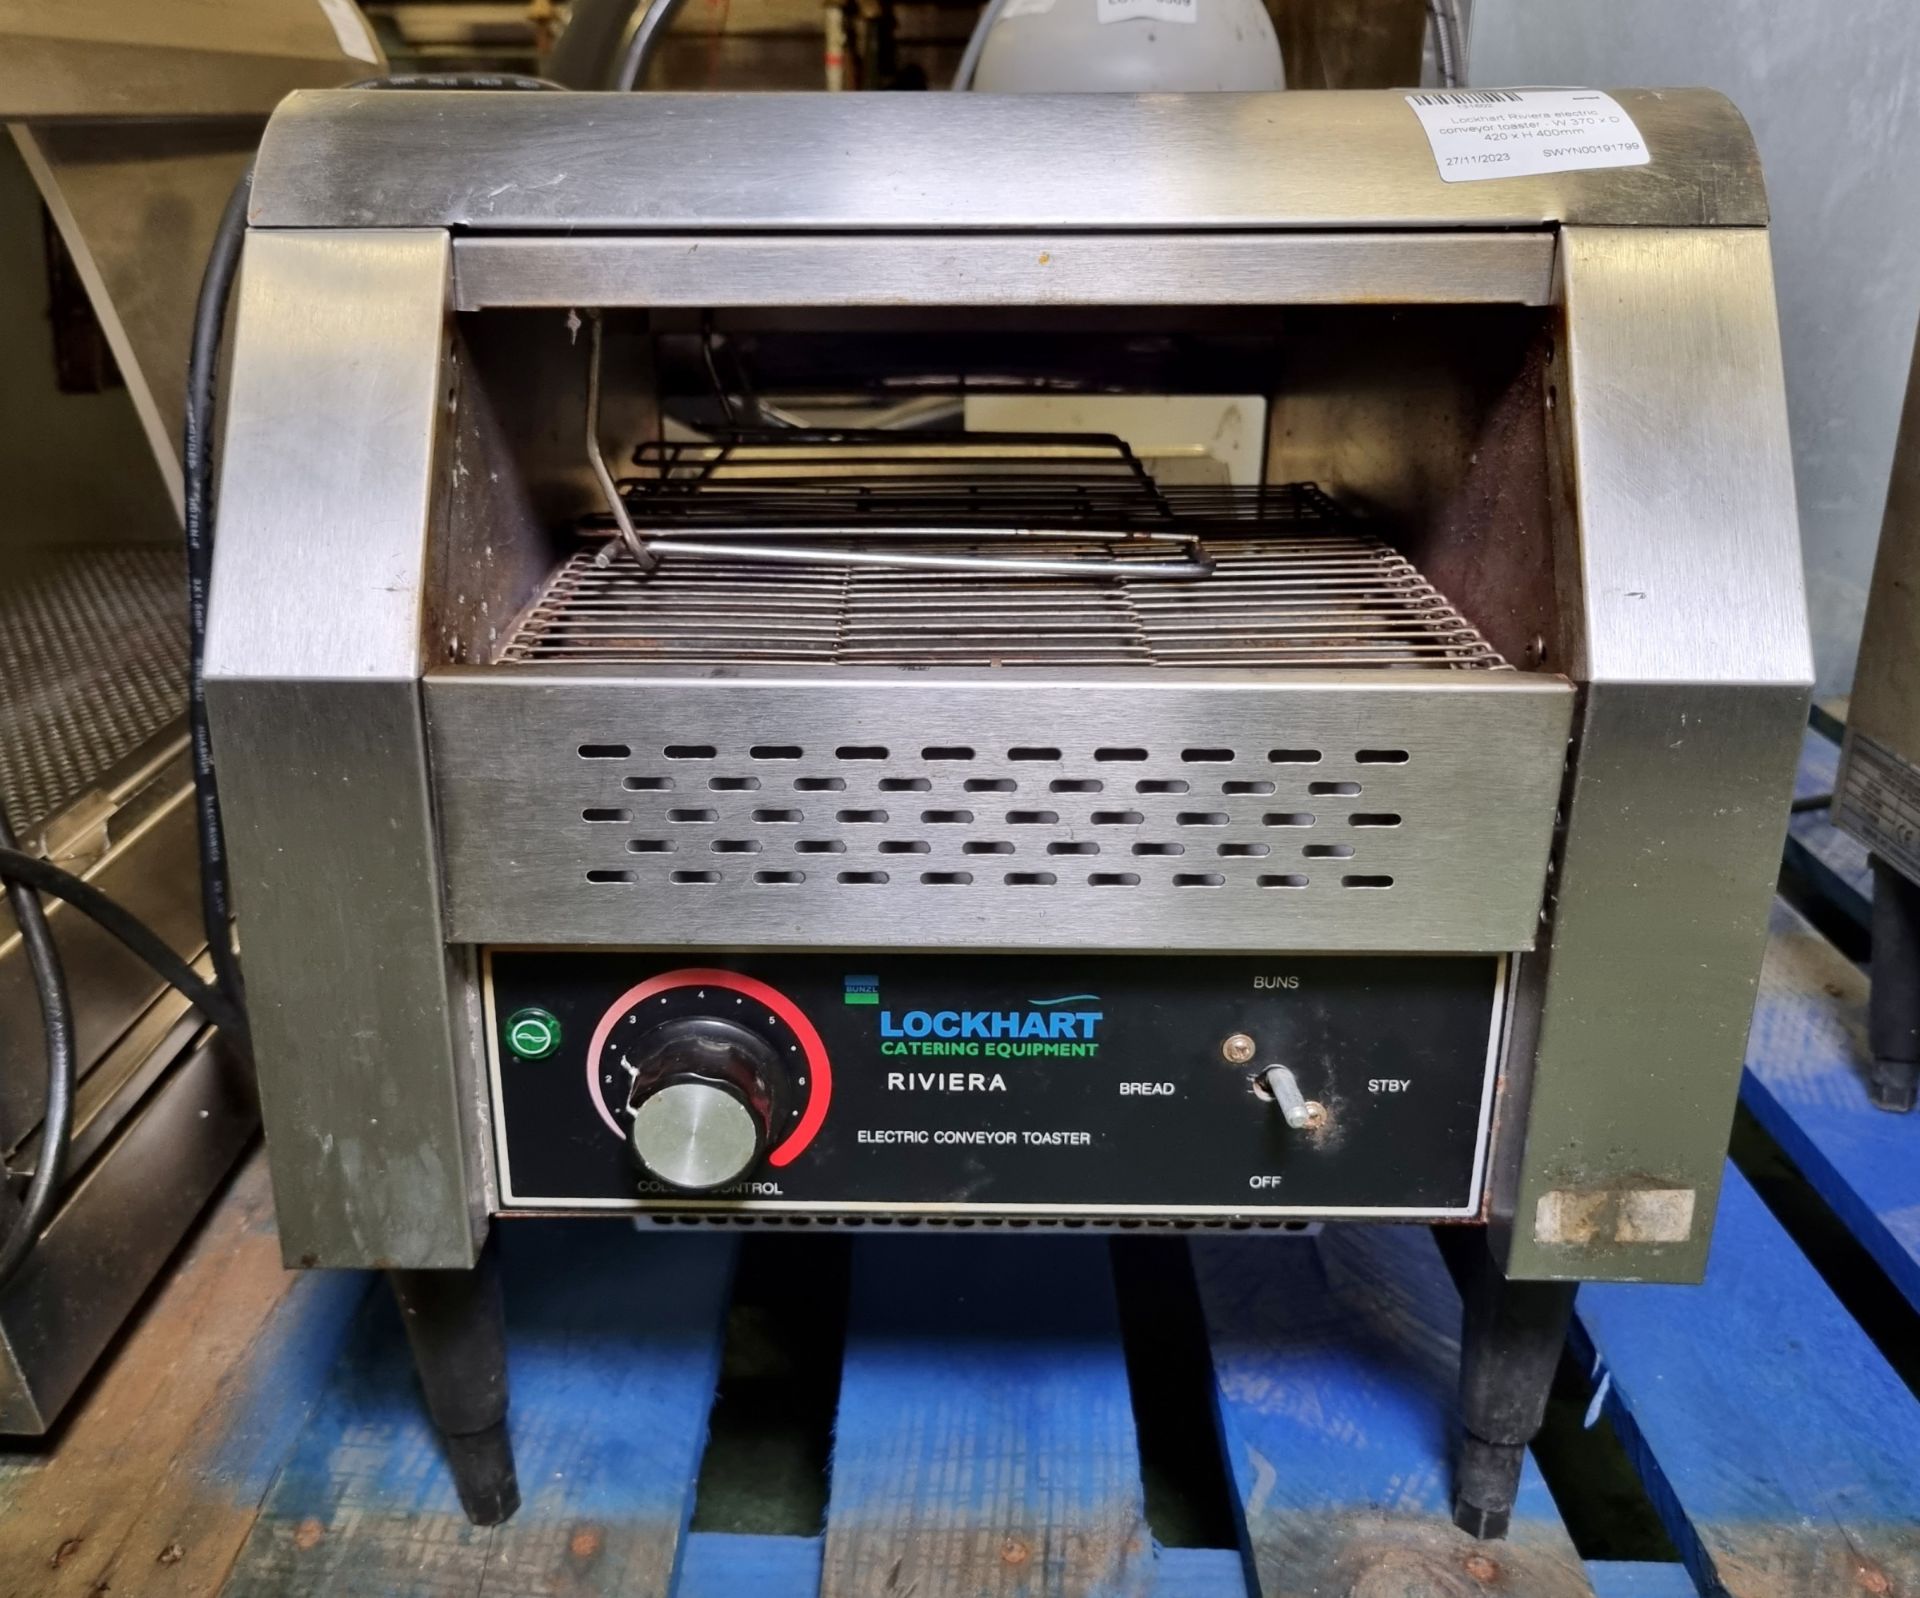 Lockhart Riviera electric conveyor toaster - W 370 x D 420 x H 400mm - Image 2 of 4